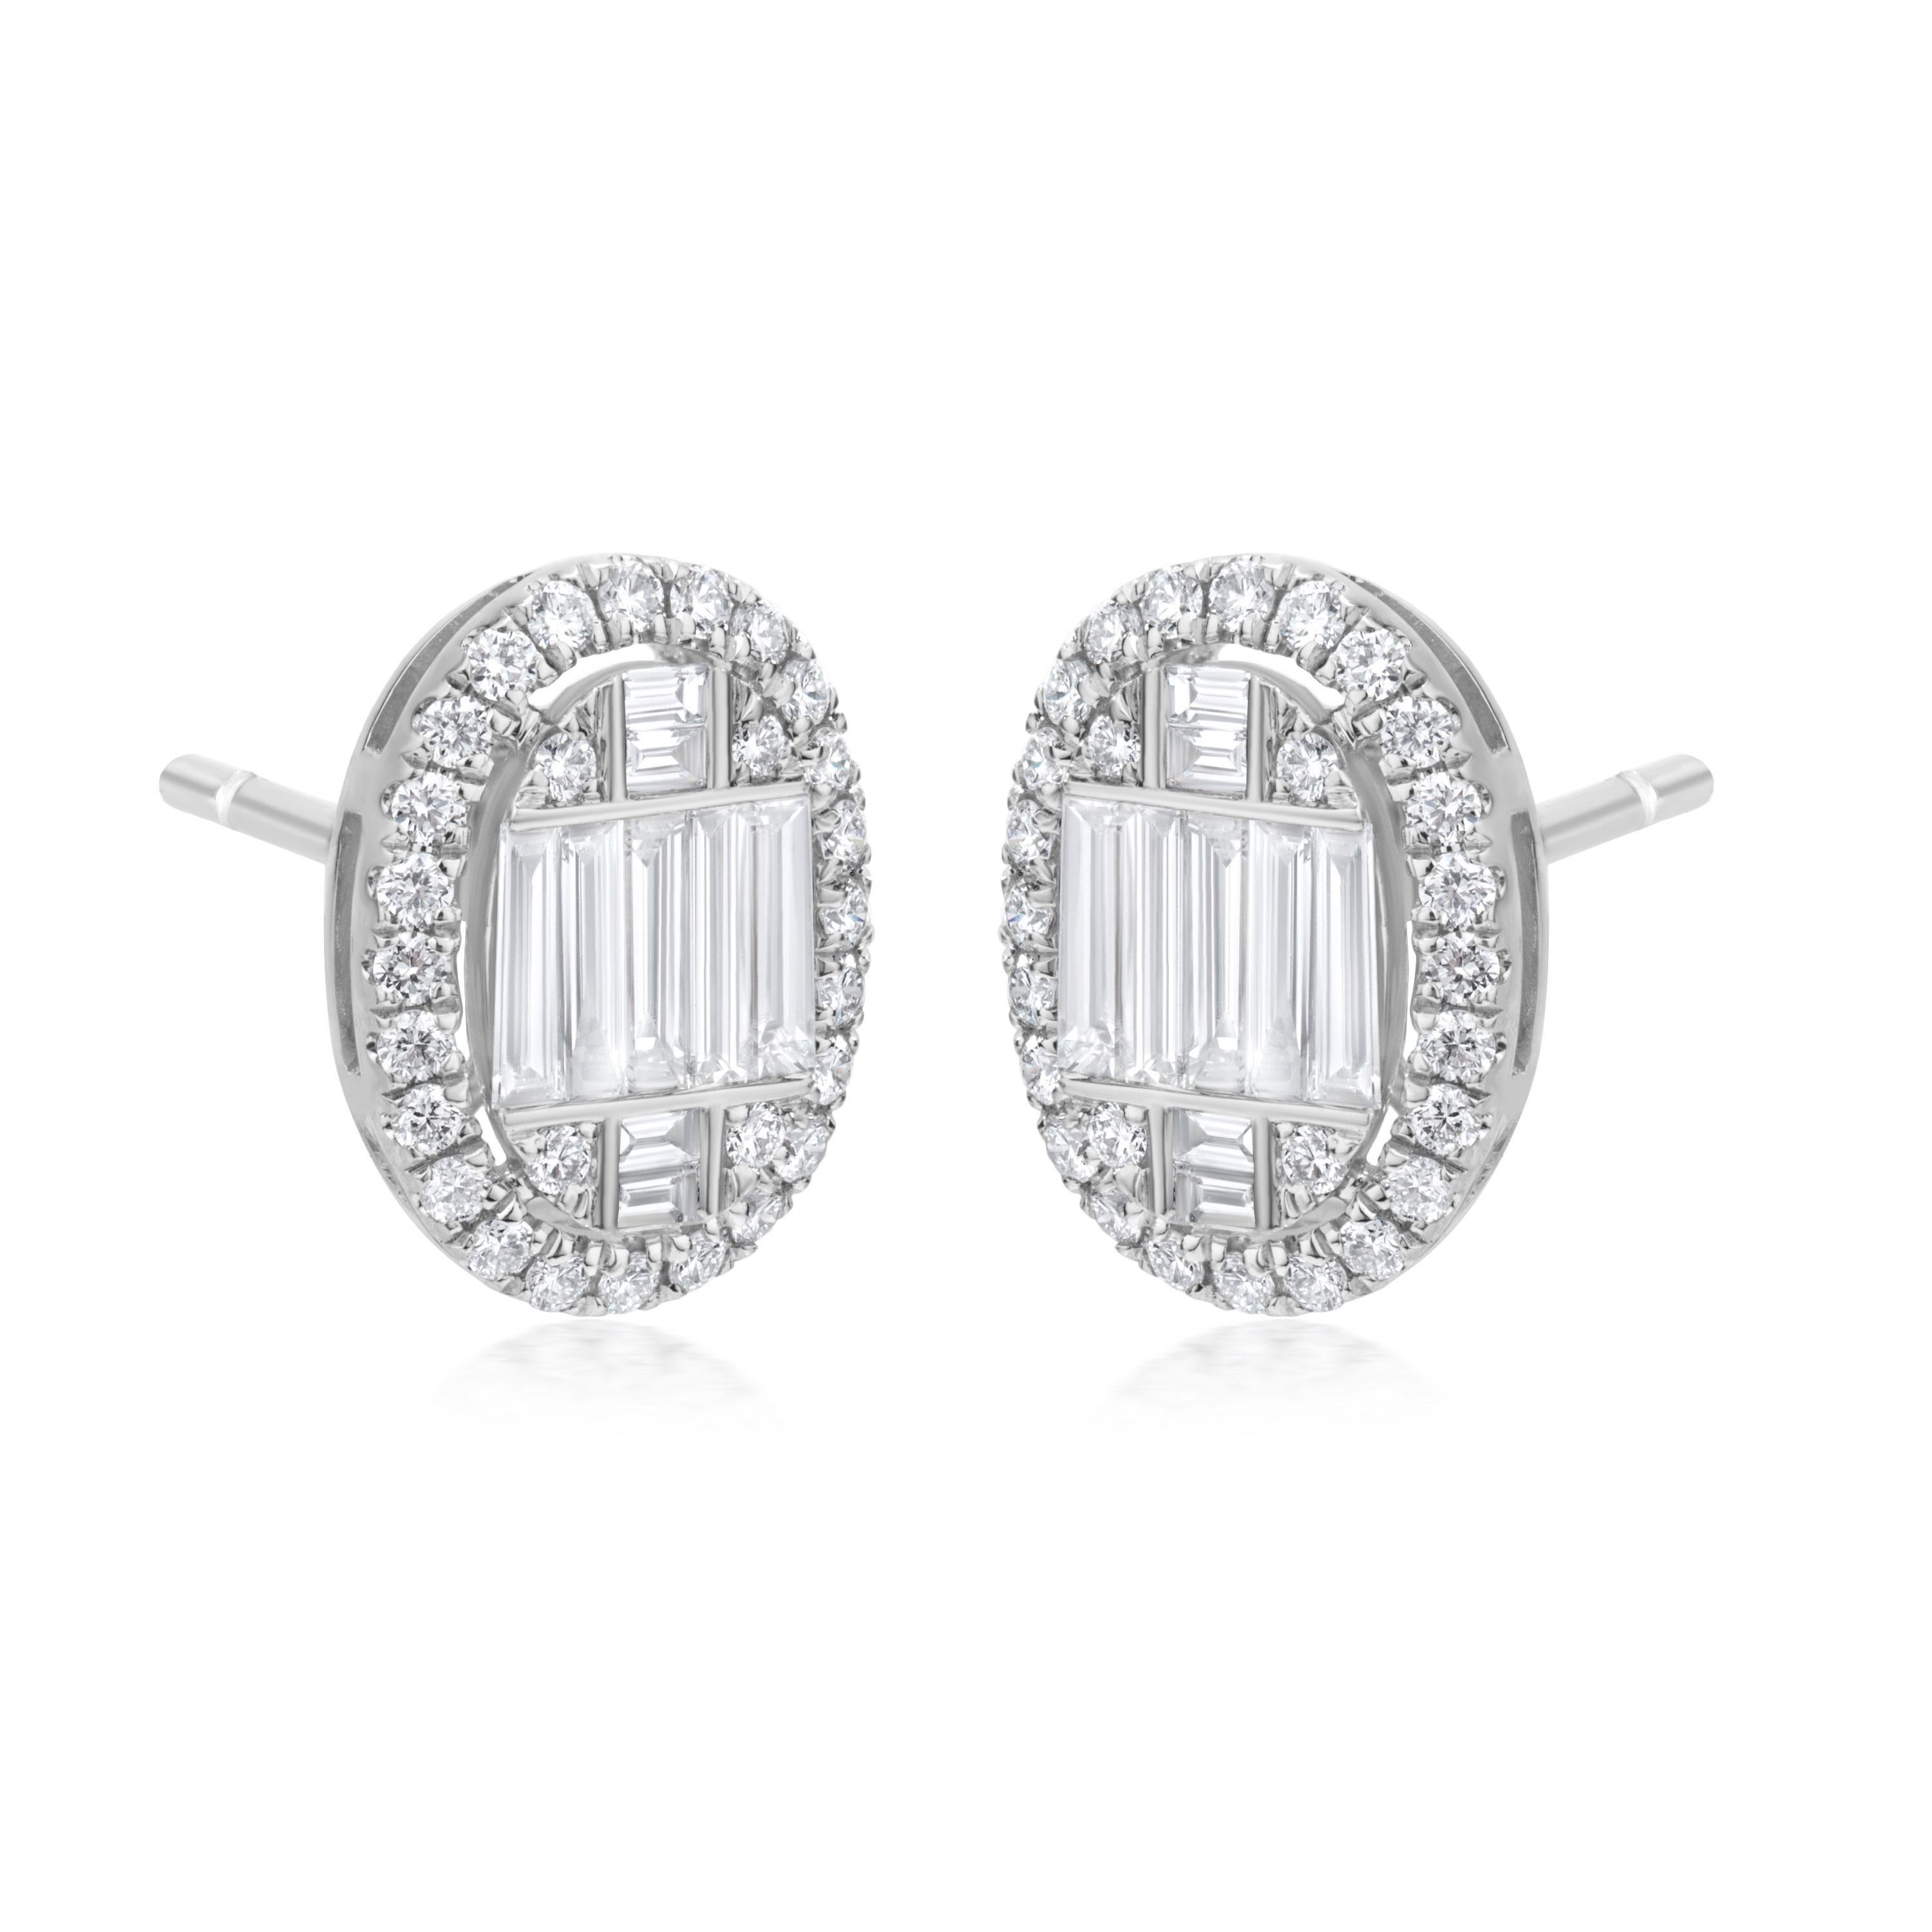 0.77Cts. Diamond Halo Stud Earrings in 18K White Gold. This bold and modern interpretation is artistically set by Luxle with round-shape and baguette clusters framed by sparkling diamond halo and set in 18k white gold. Post and Clutch Diamond stud